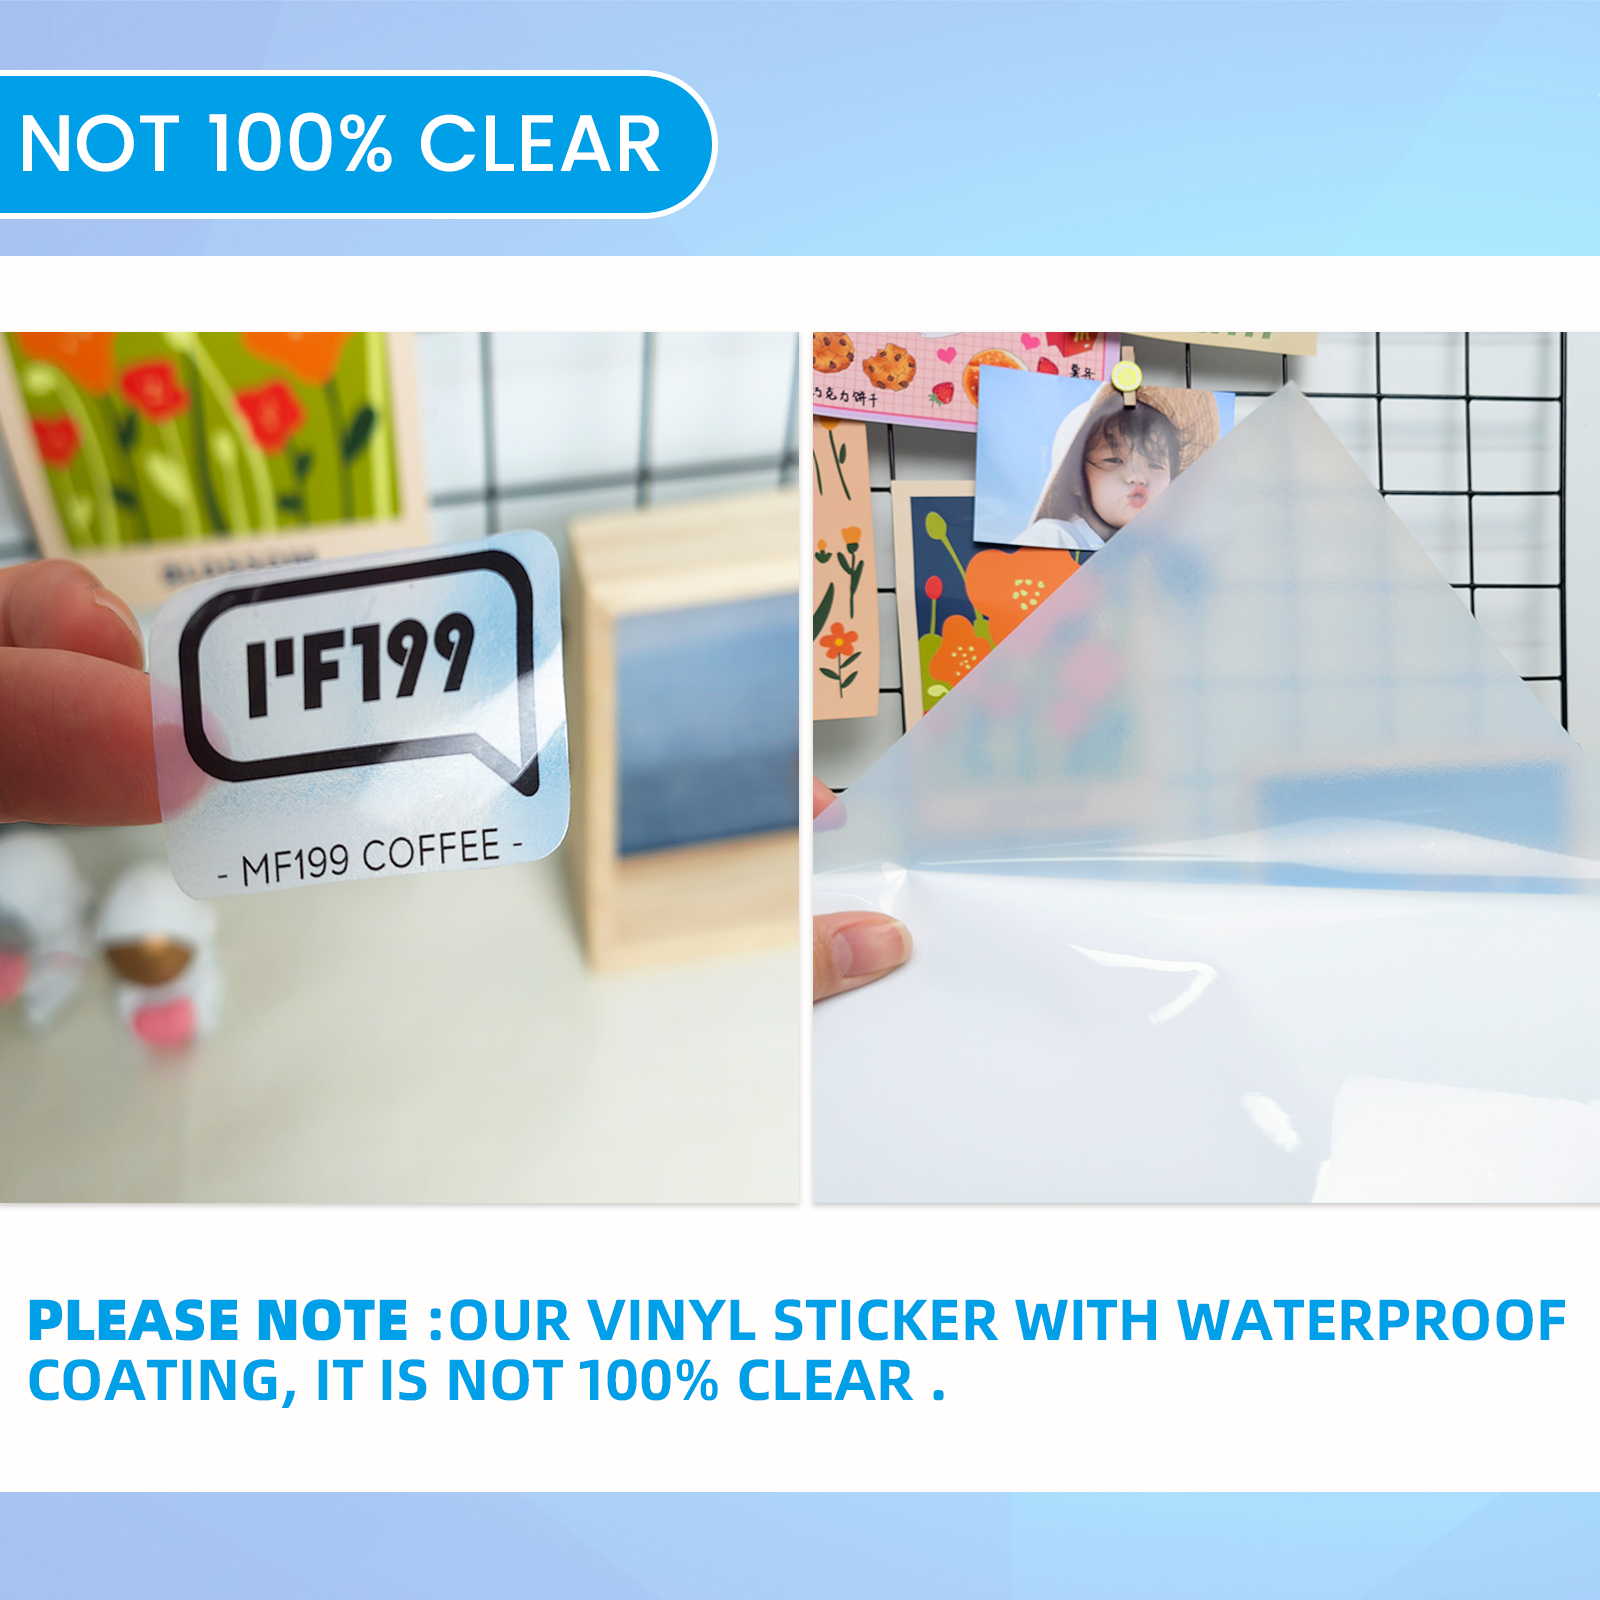 20/10 Sheets Crystal 100% Clear Printable Vinyl Sticker Paper For Inkjet  Printer,a4 100% Transparent Self-adhesive Sticker Paper For  Circut-printable, Check Out Today's Deals Now